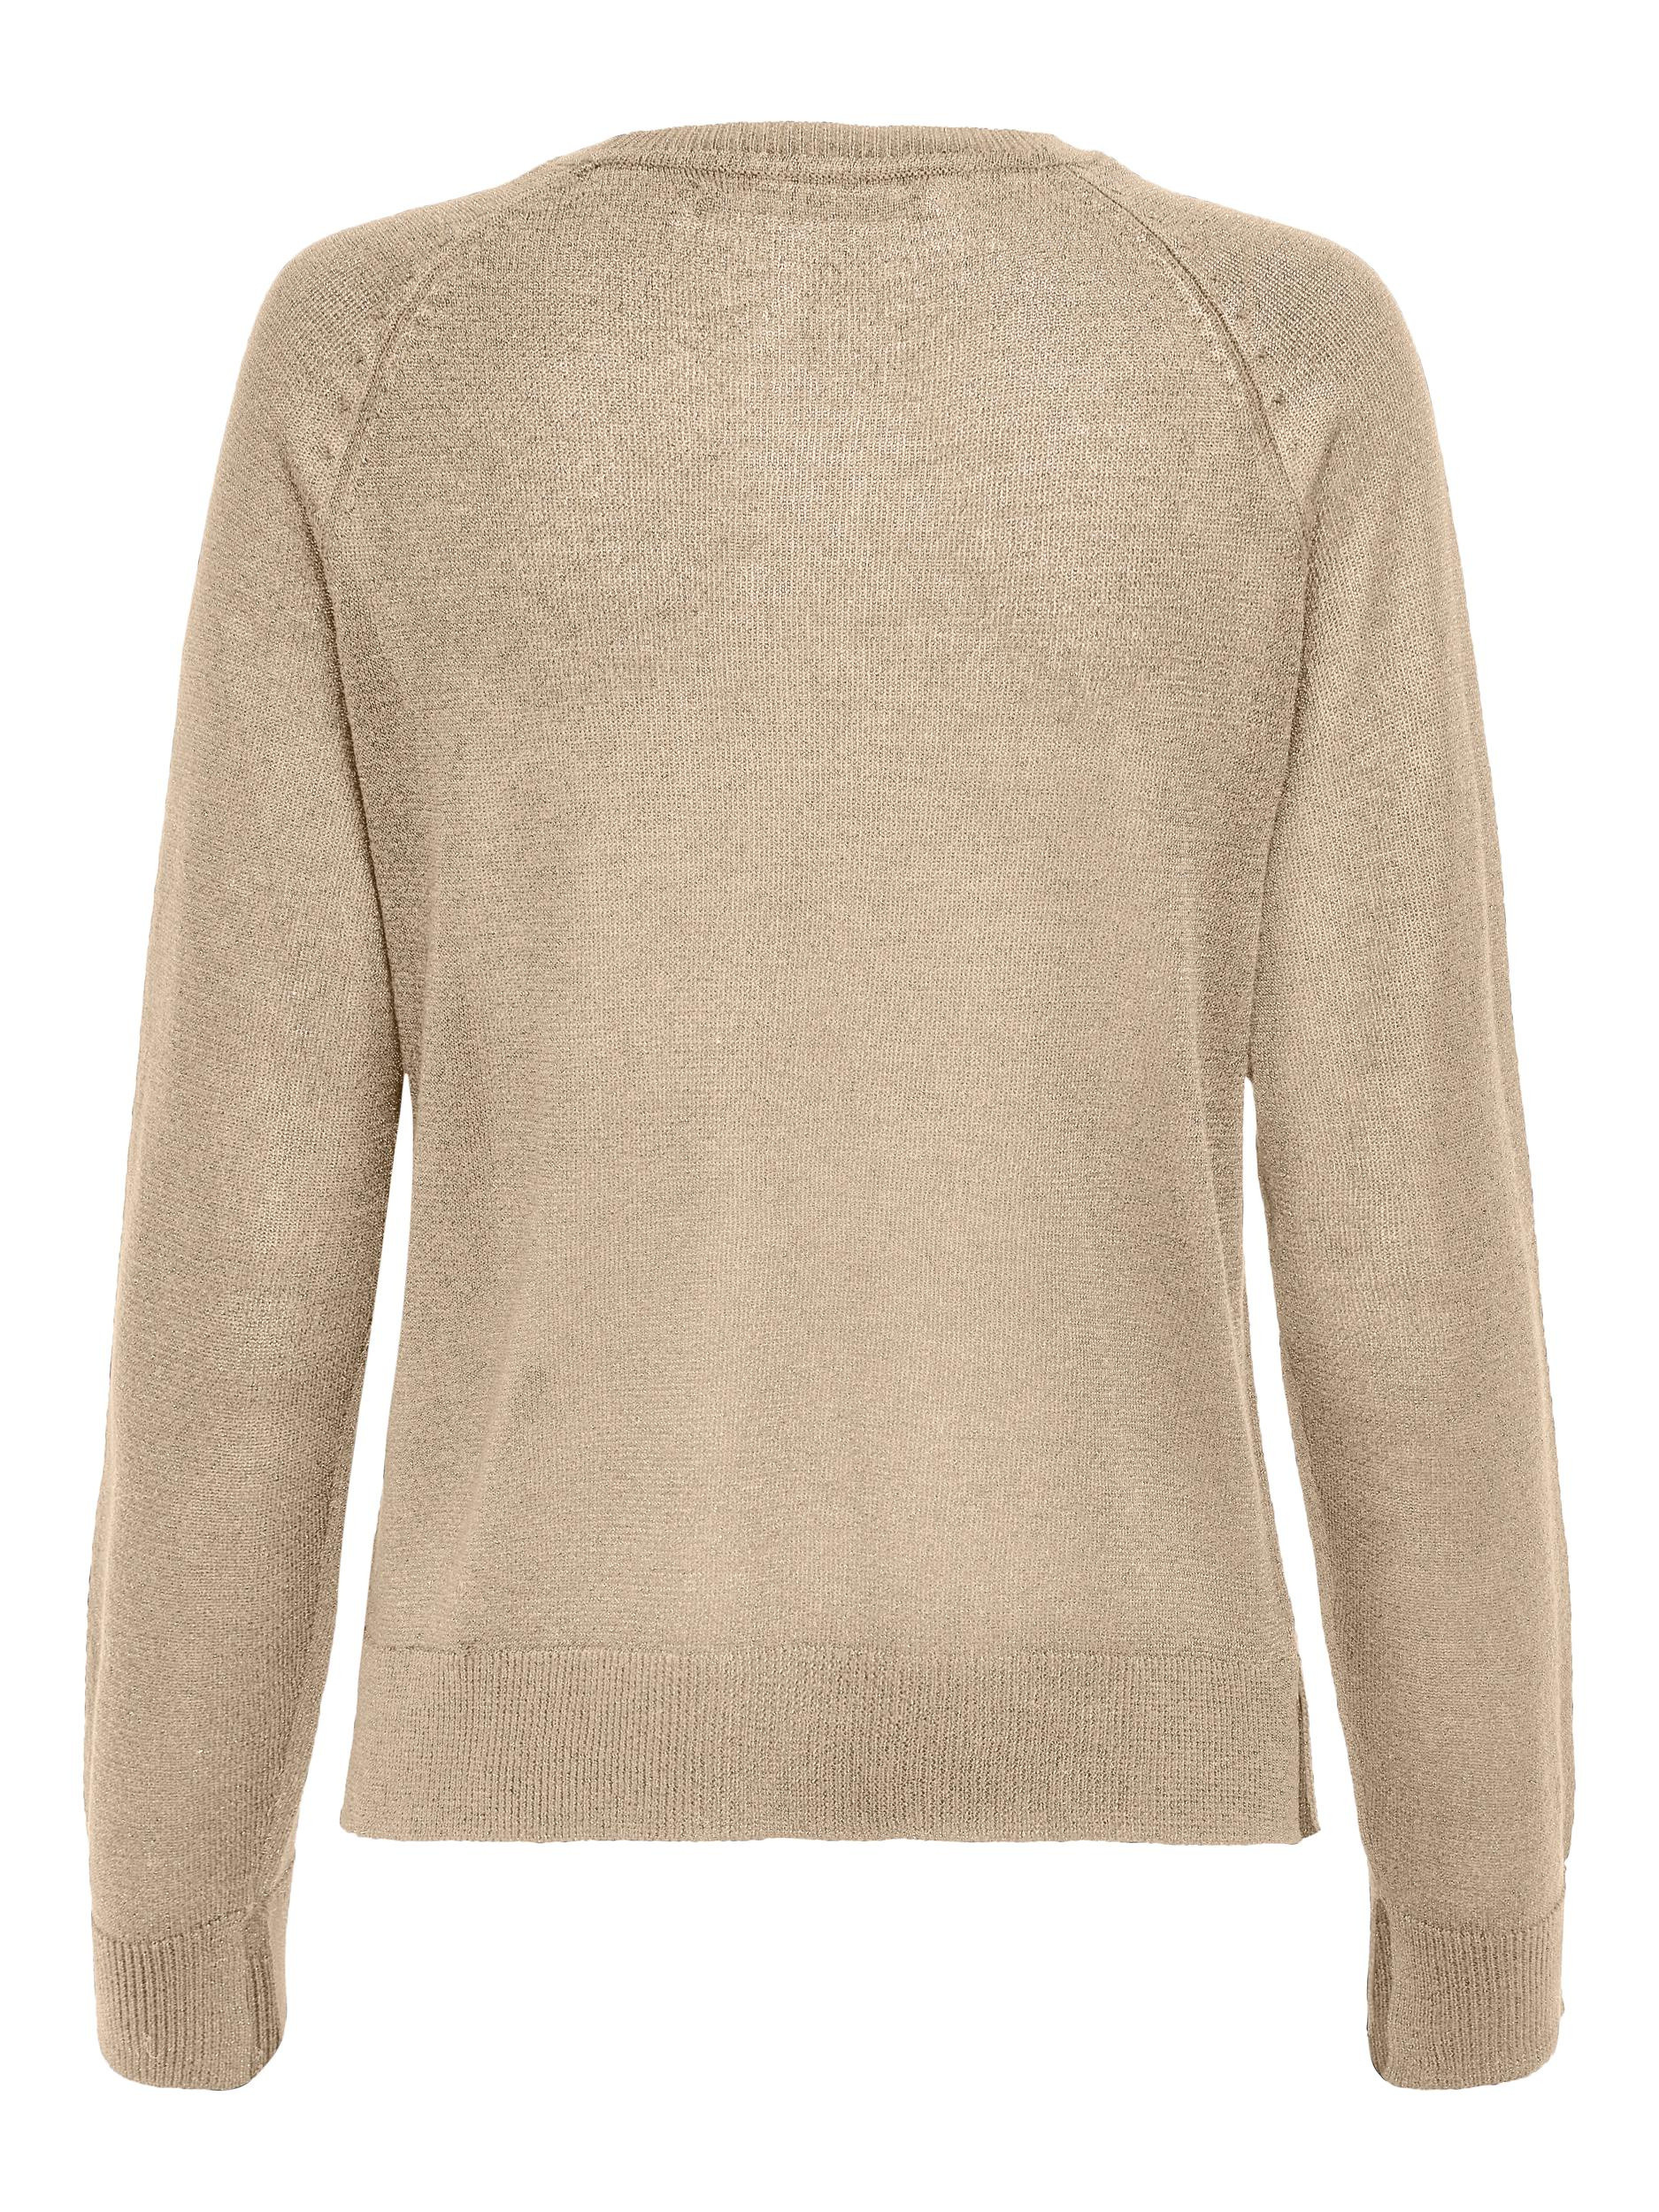 Pullover a girocollo, Beige, large